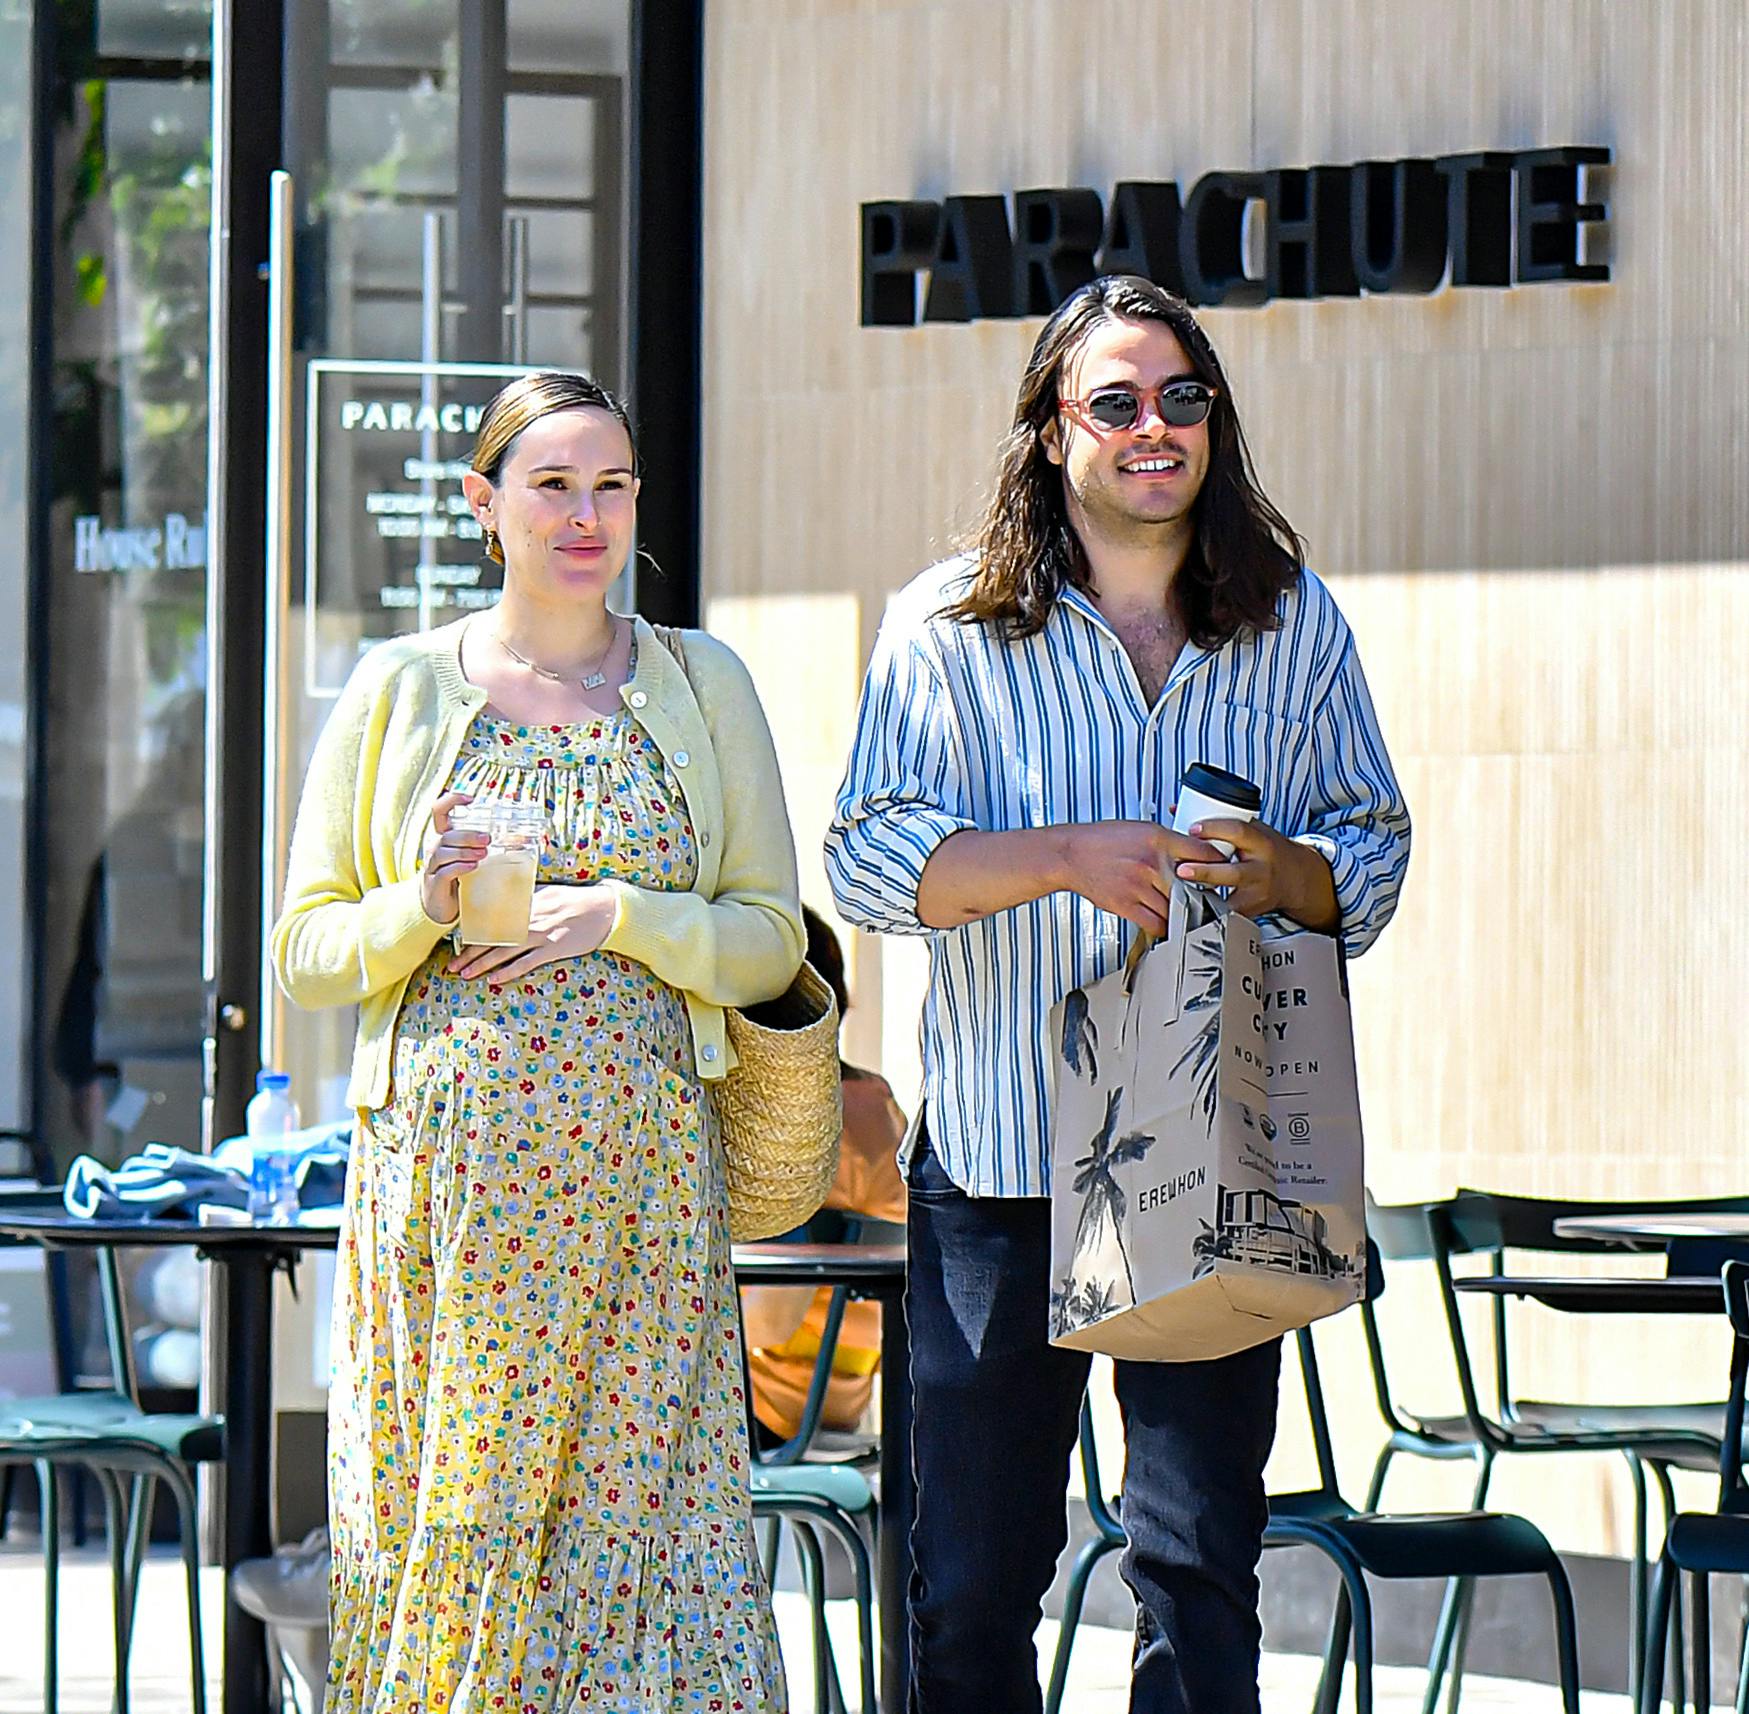 Rumer Willis Is All Smiles As She Holds Her Baby Bump While Out With Her Boyfriend Derek Richard Thomas In Los Angeles, CA. The expecting parents were seem grabbing some coffee and quick snacks from Erewhon. 10 Apr 2023 Pictured: Rumer Willis. Photo credit: @CelebCandidly / MEGA TheMegaAgency.com +1 888 505 6342 (Mega Agency TagID: MEGA967546_001.jpg) [Photo via Mega Agency]